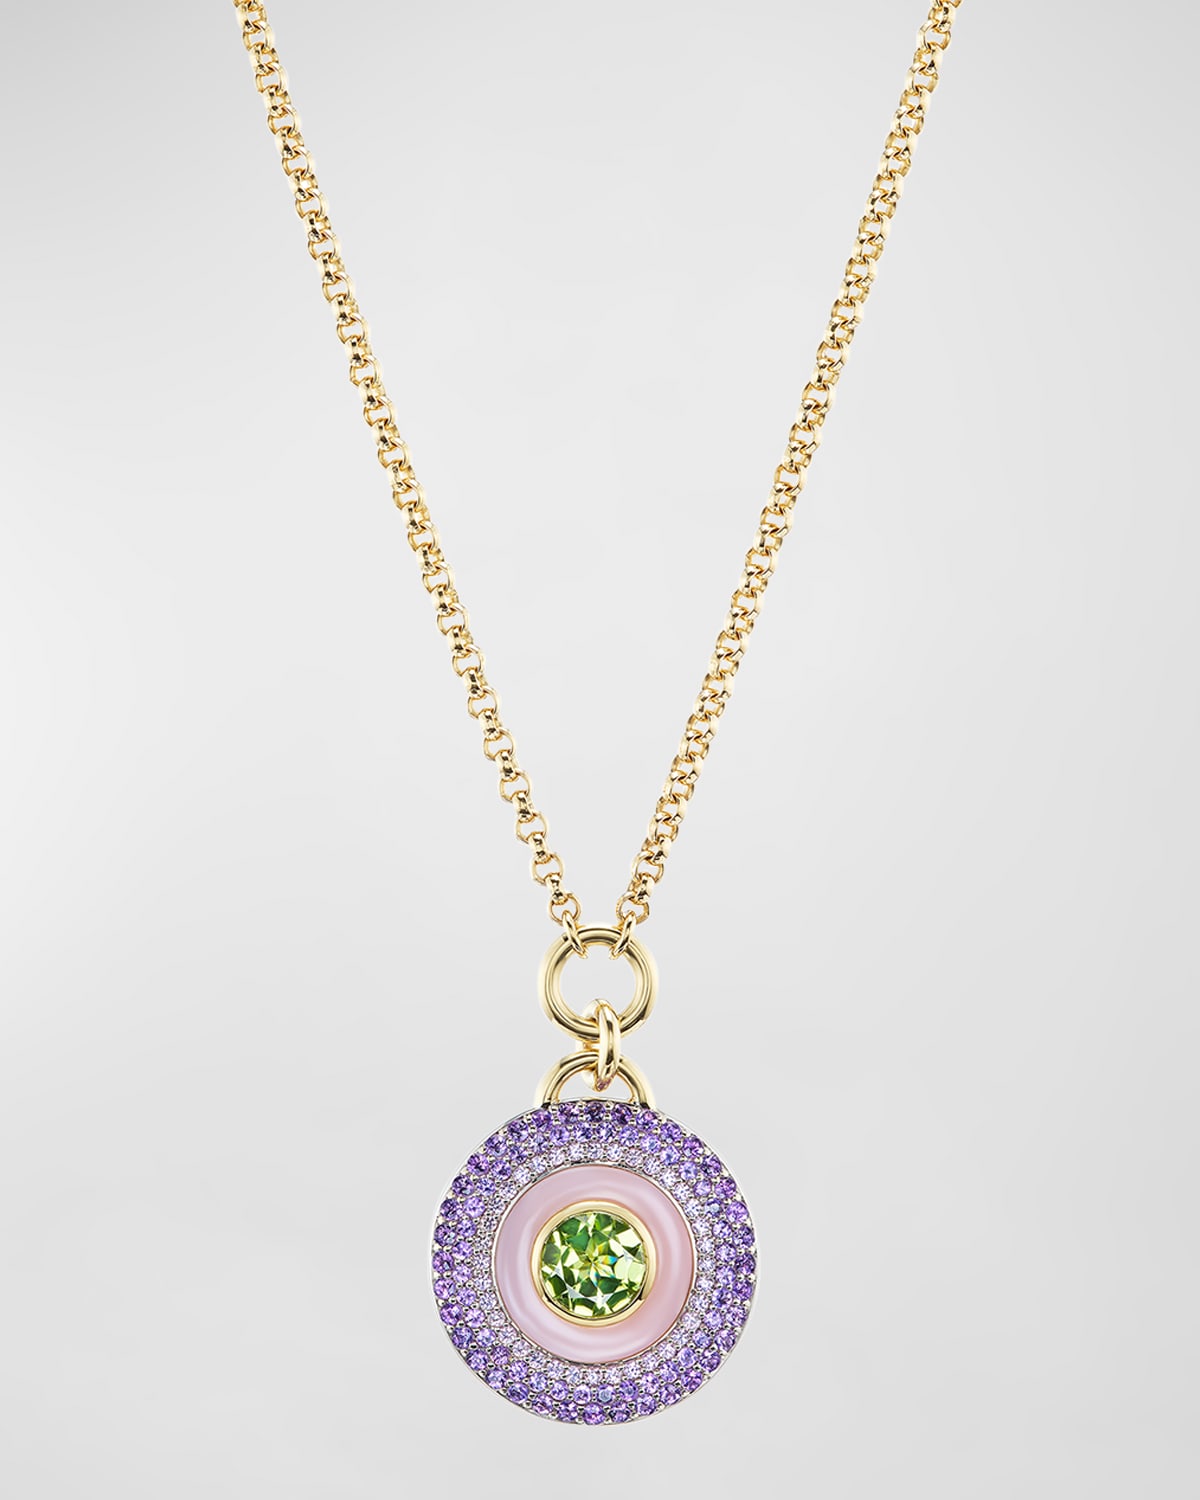 Earth Medallion 18K White and Black Gold Necklace with Peridot, Amethyst and Pink Opal